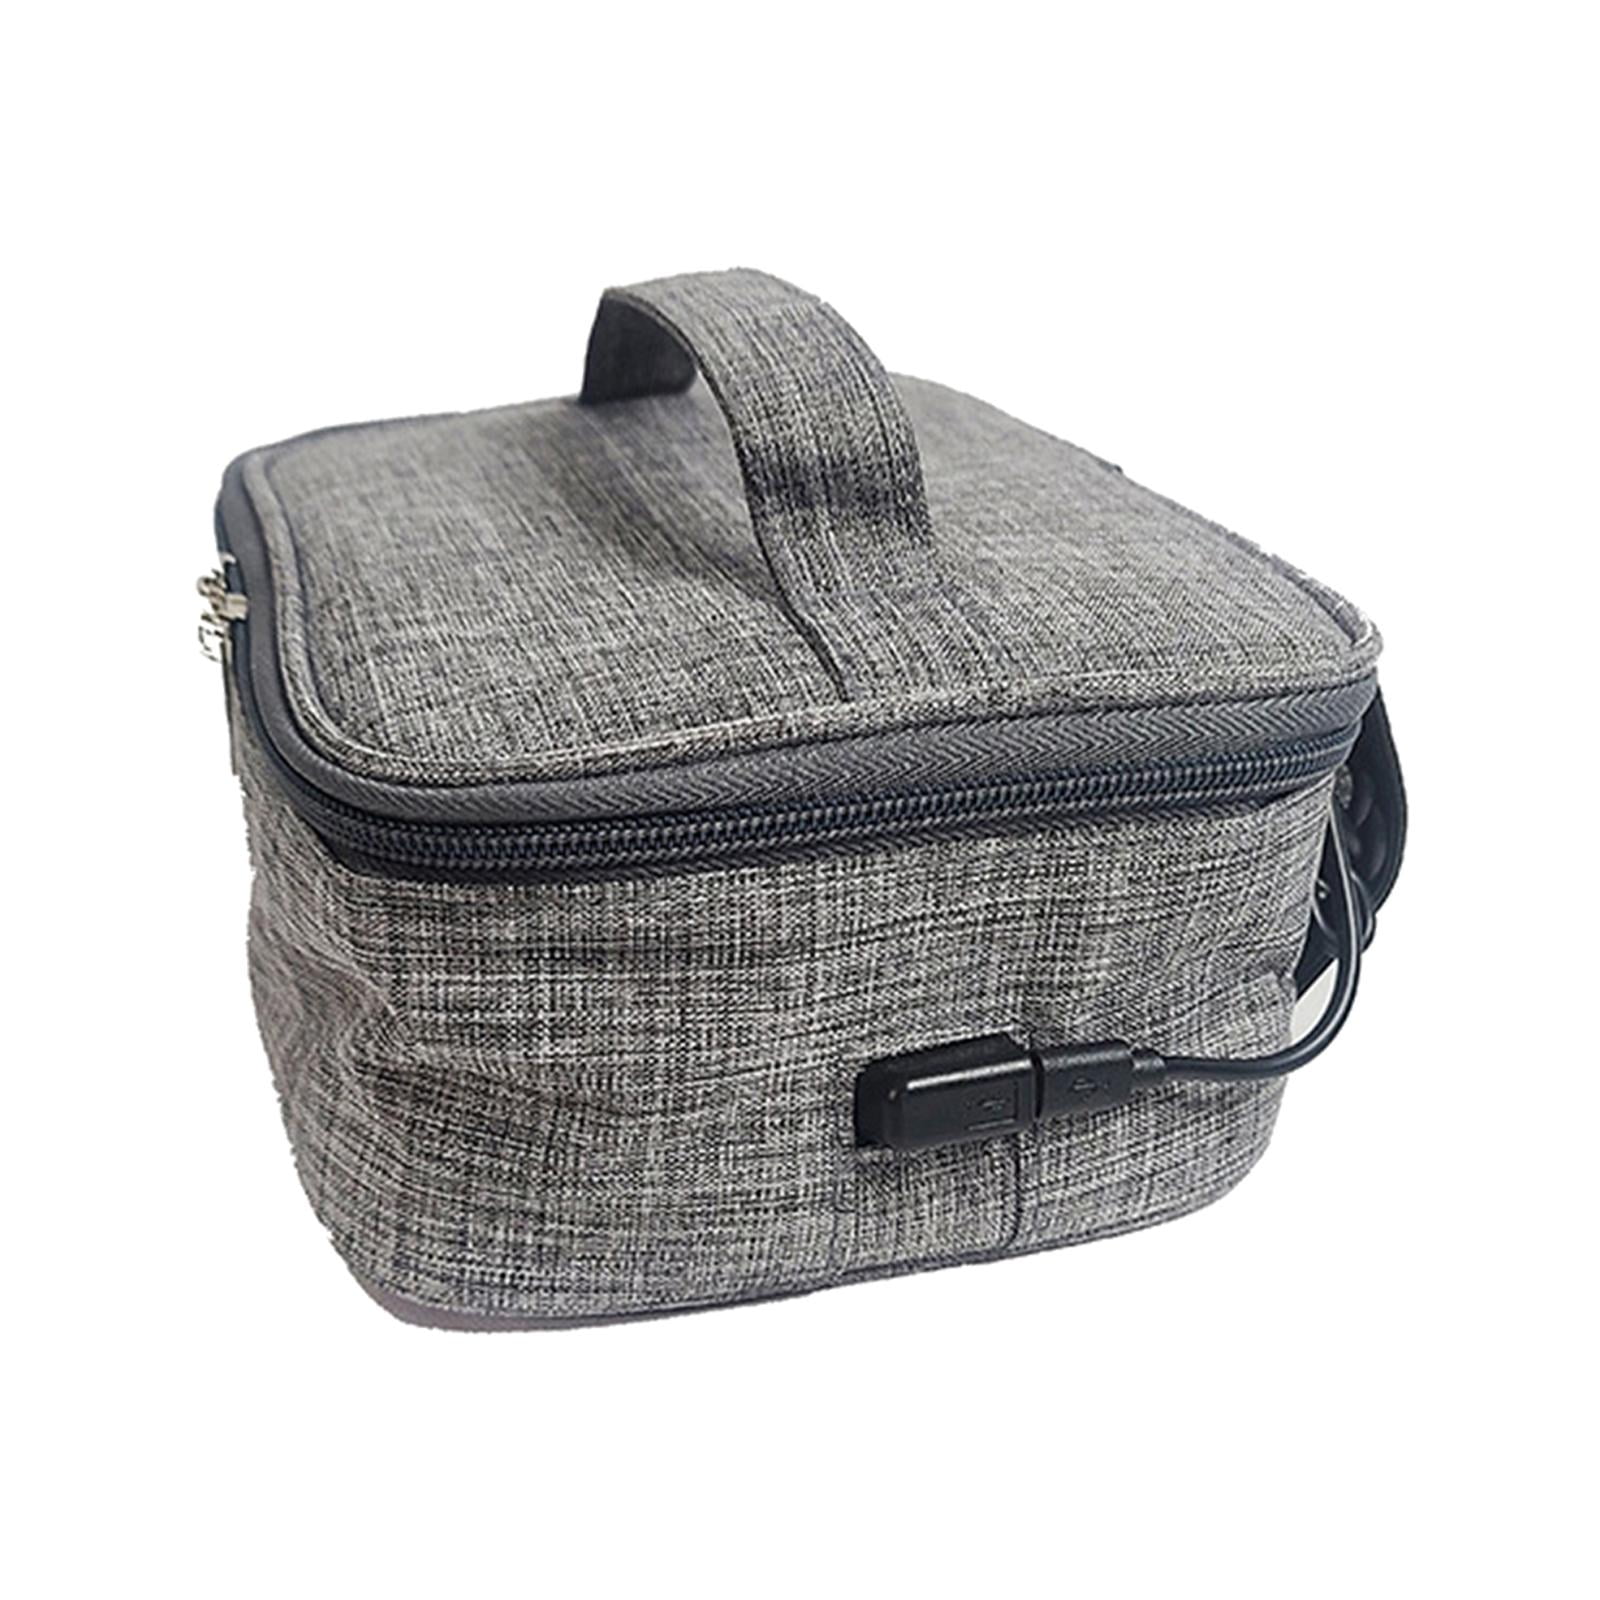 Electric USB Heating Lunch Box Insulation Bag Oxford Cloth for Office Food Warmer Convenient ,Grey for Adults with Zipper Portable Oven , USB, Size